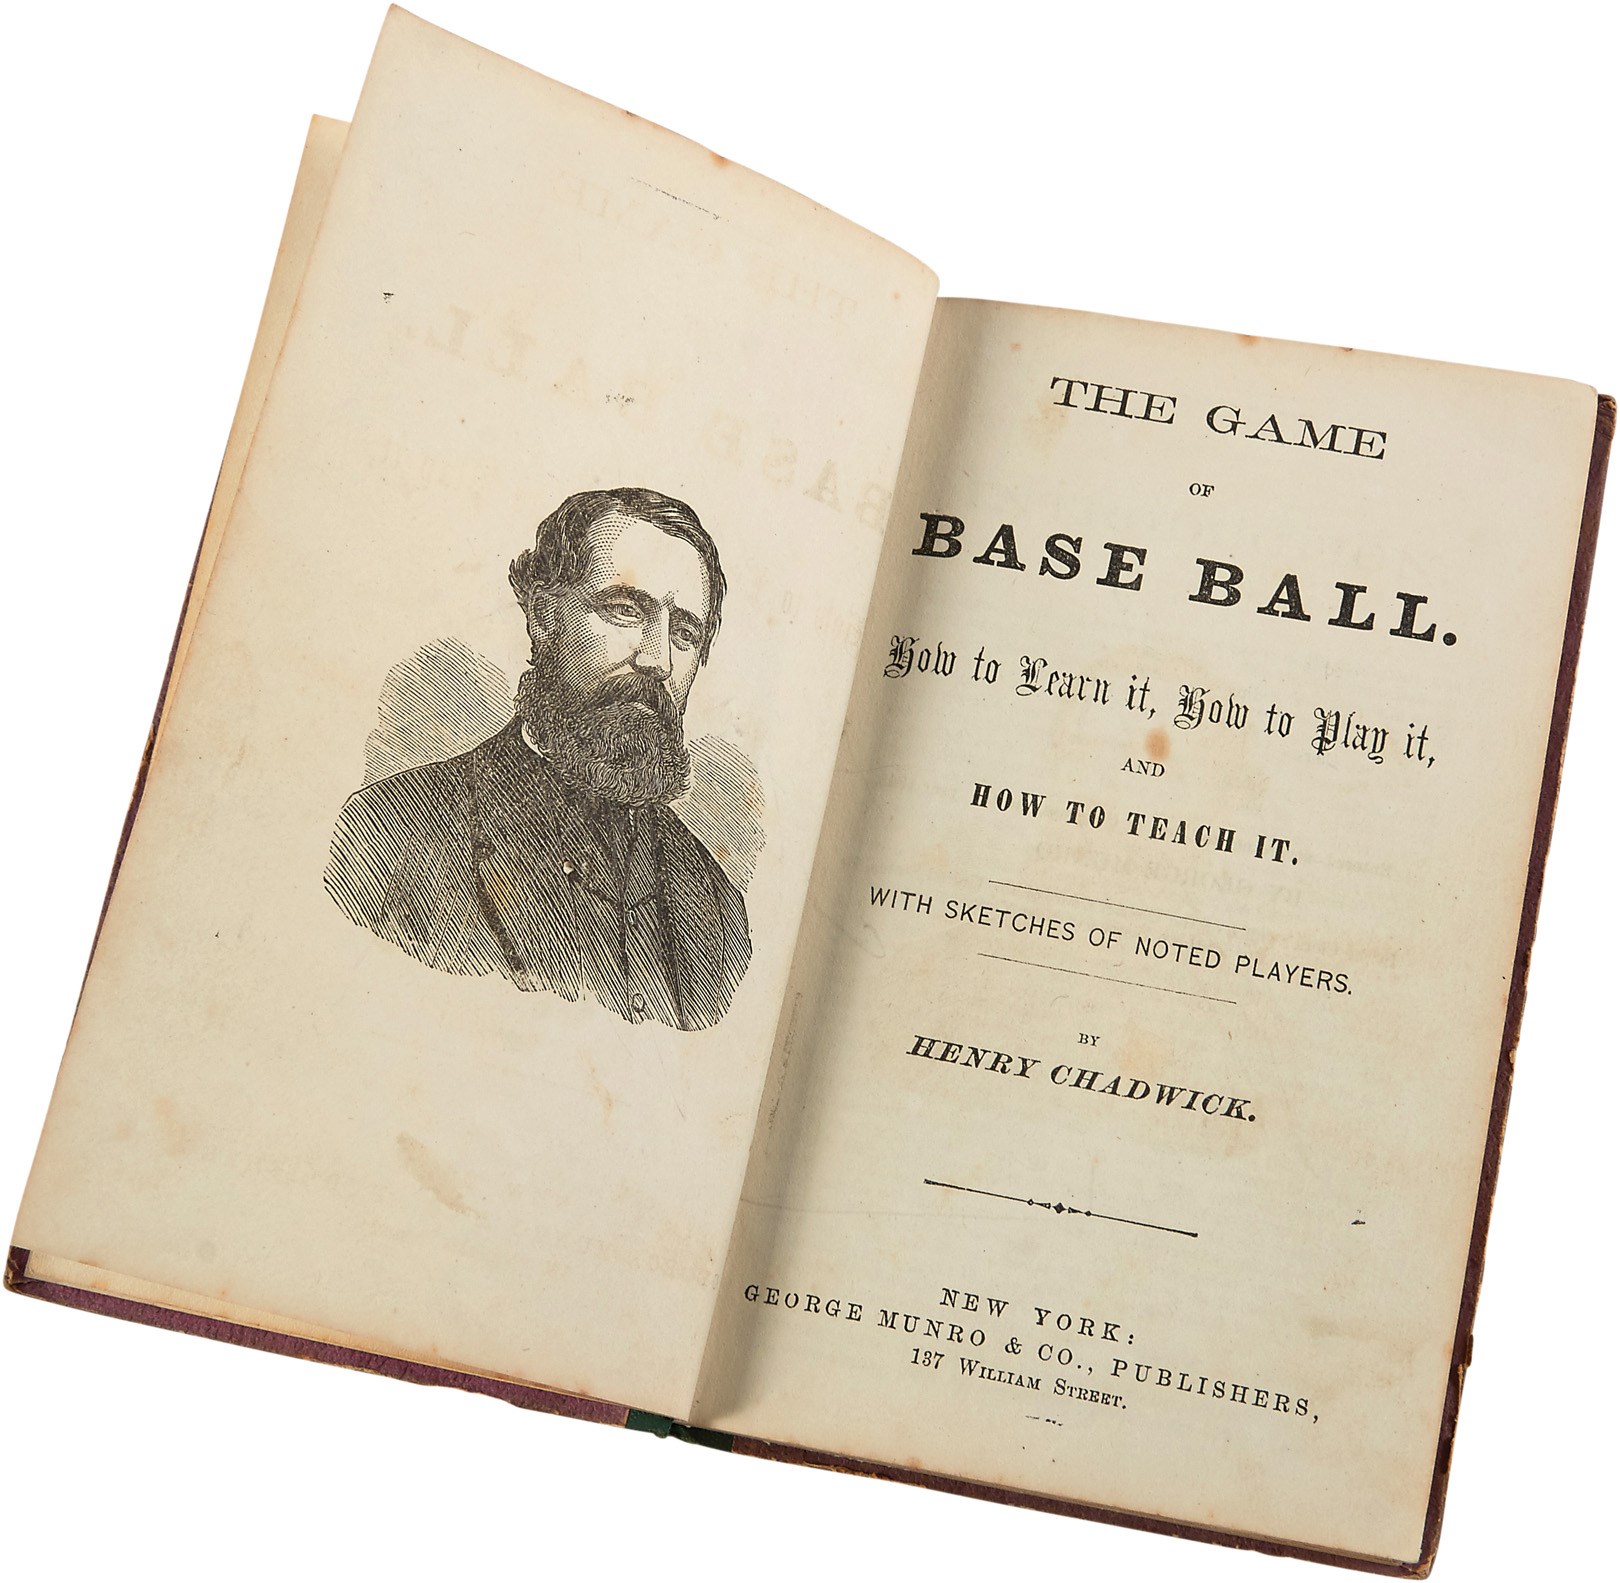 1868 First Edition "The Game of Baseball" by Henry Chadwick